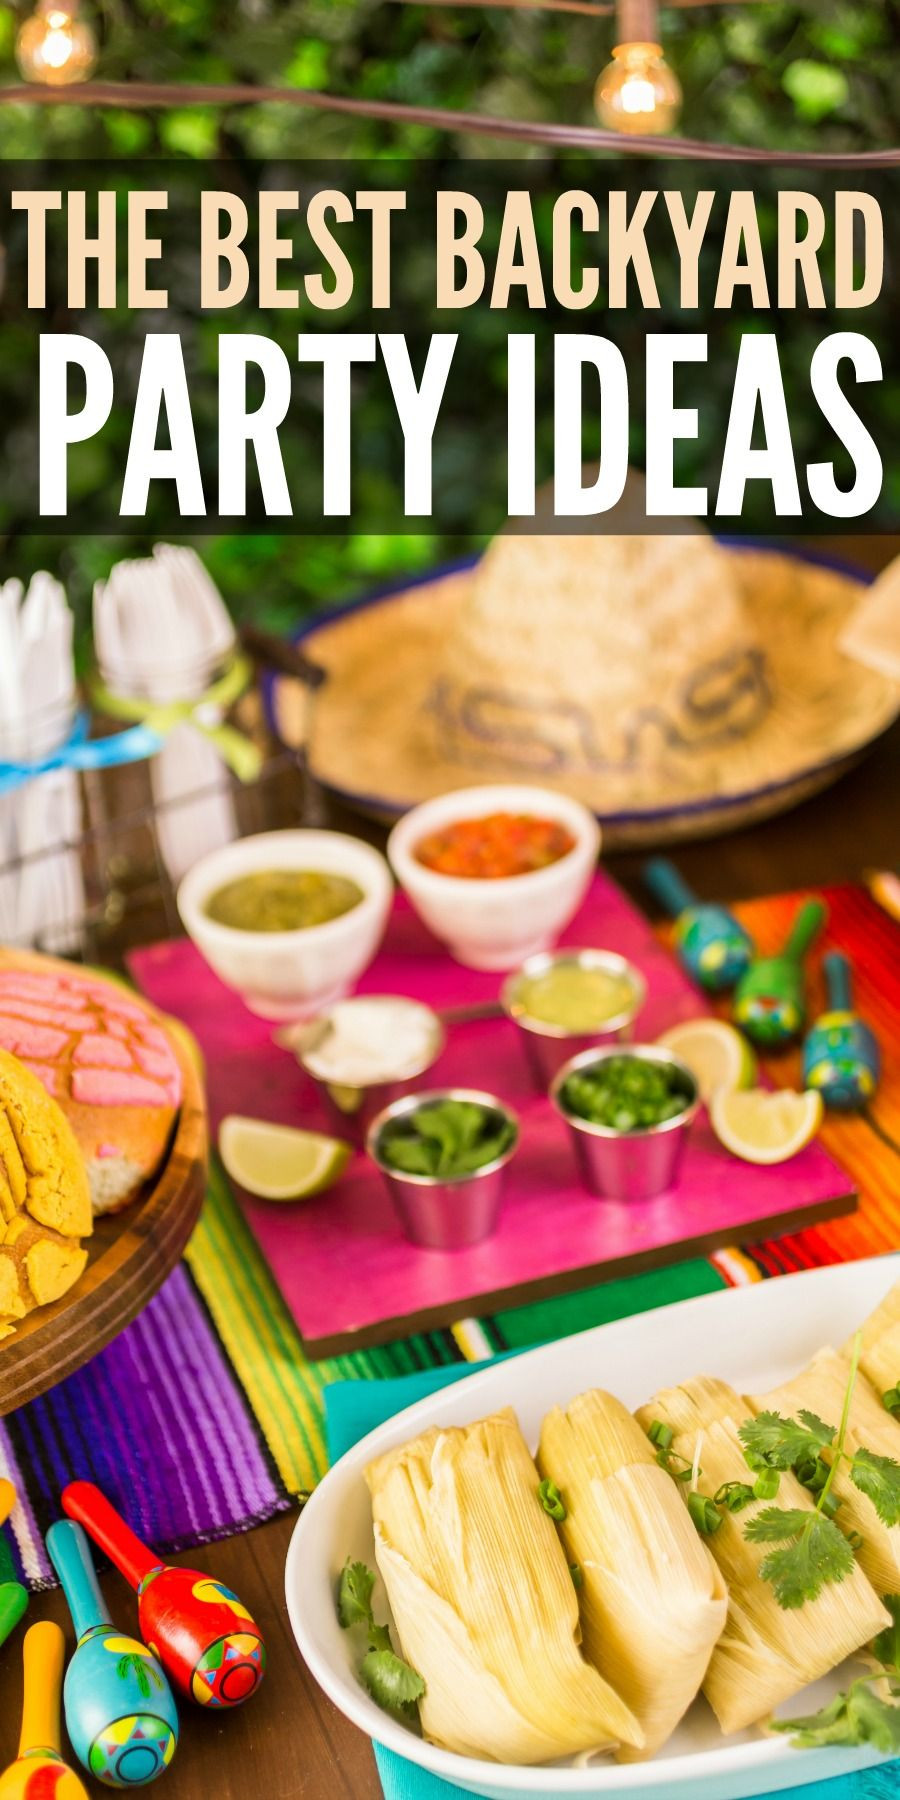 Backyard Cookout Party Ideas
 Backyard BBQ Themes for the Ultimate BBQ Party With Food